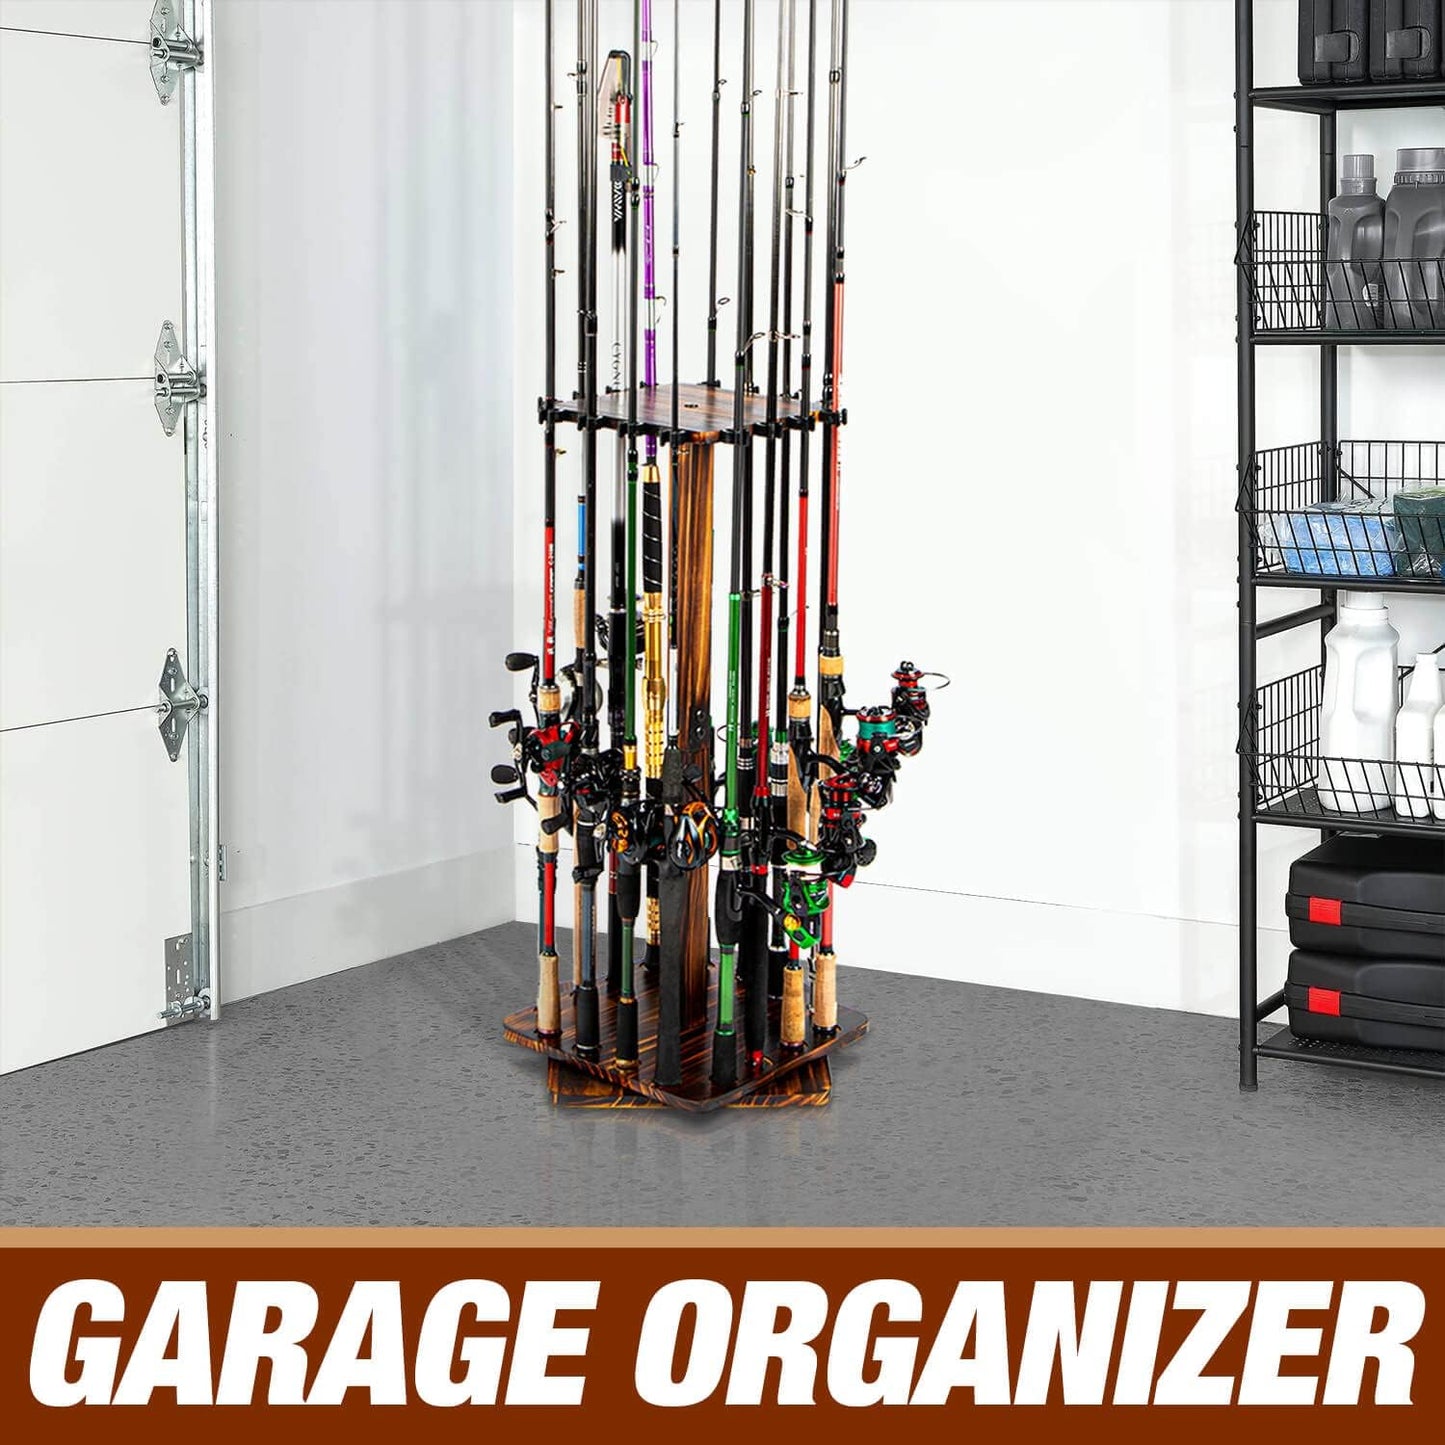 Ghosthorn Fishing Rod Holders for Garage 360 Degree Rotating Fishing Pole Rack, Floor Stand Holds up to 16 Rods Wood Fishing Gear Equipment Storage Organizer